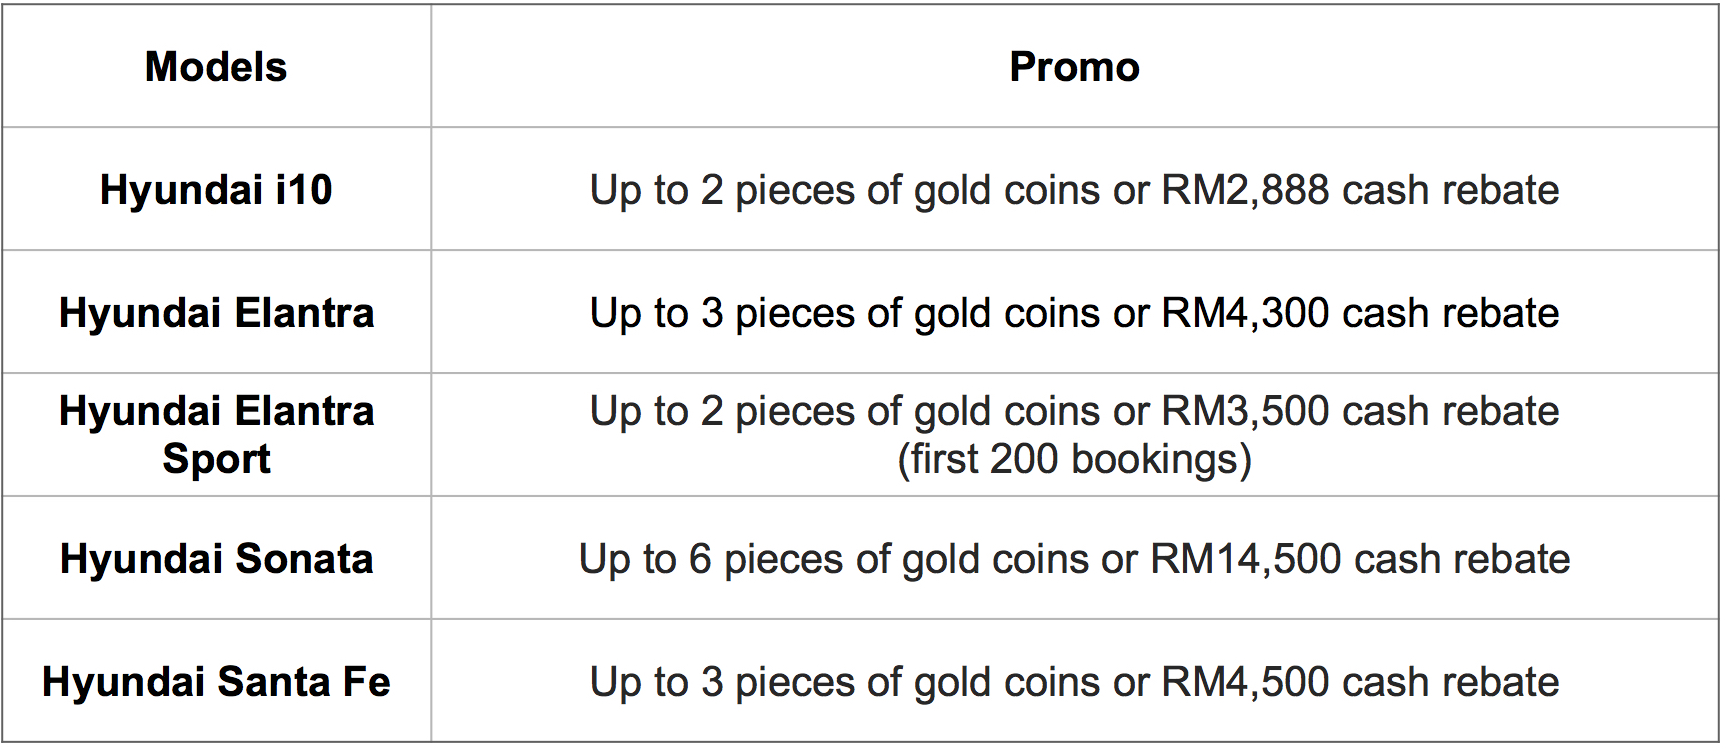 ad-get-limited-edition-pure-gold-coins-or-cash-rebates-of-up-to-rm14